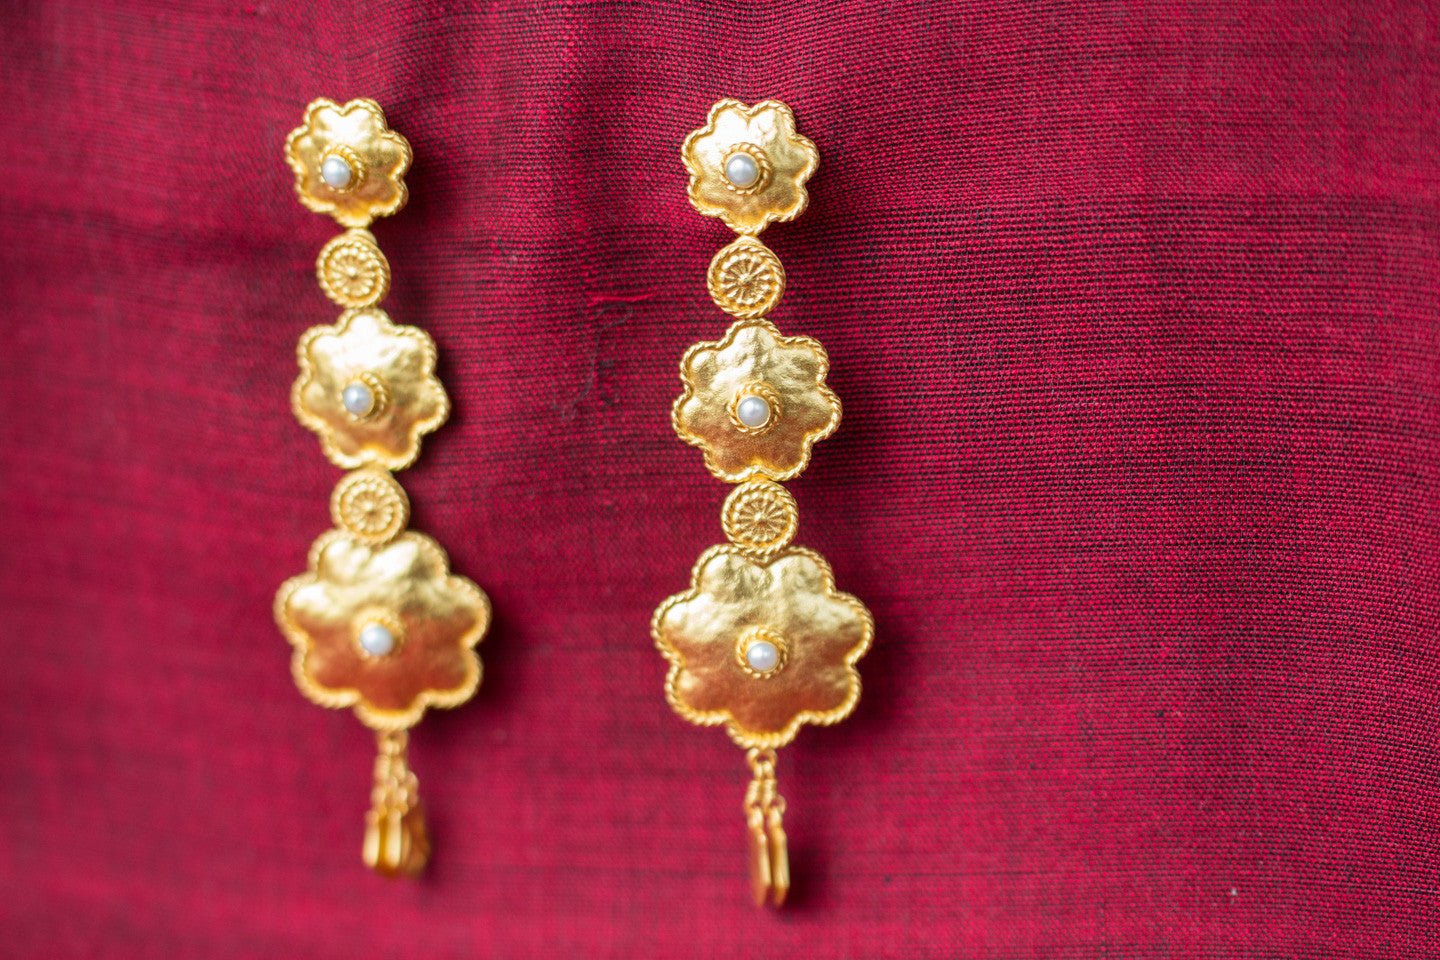 20a469-silver-gold-plated-amrapali-earrings-floral-design-alternate-view